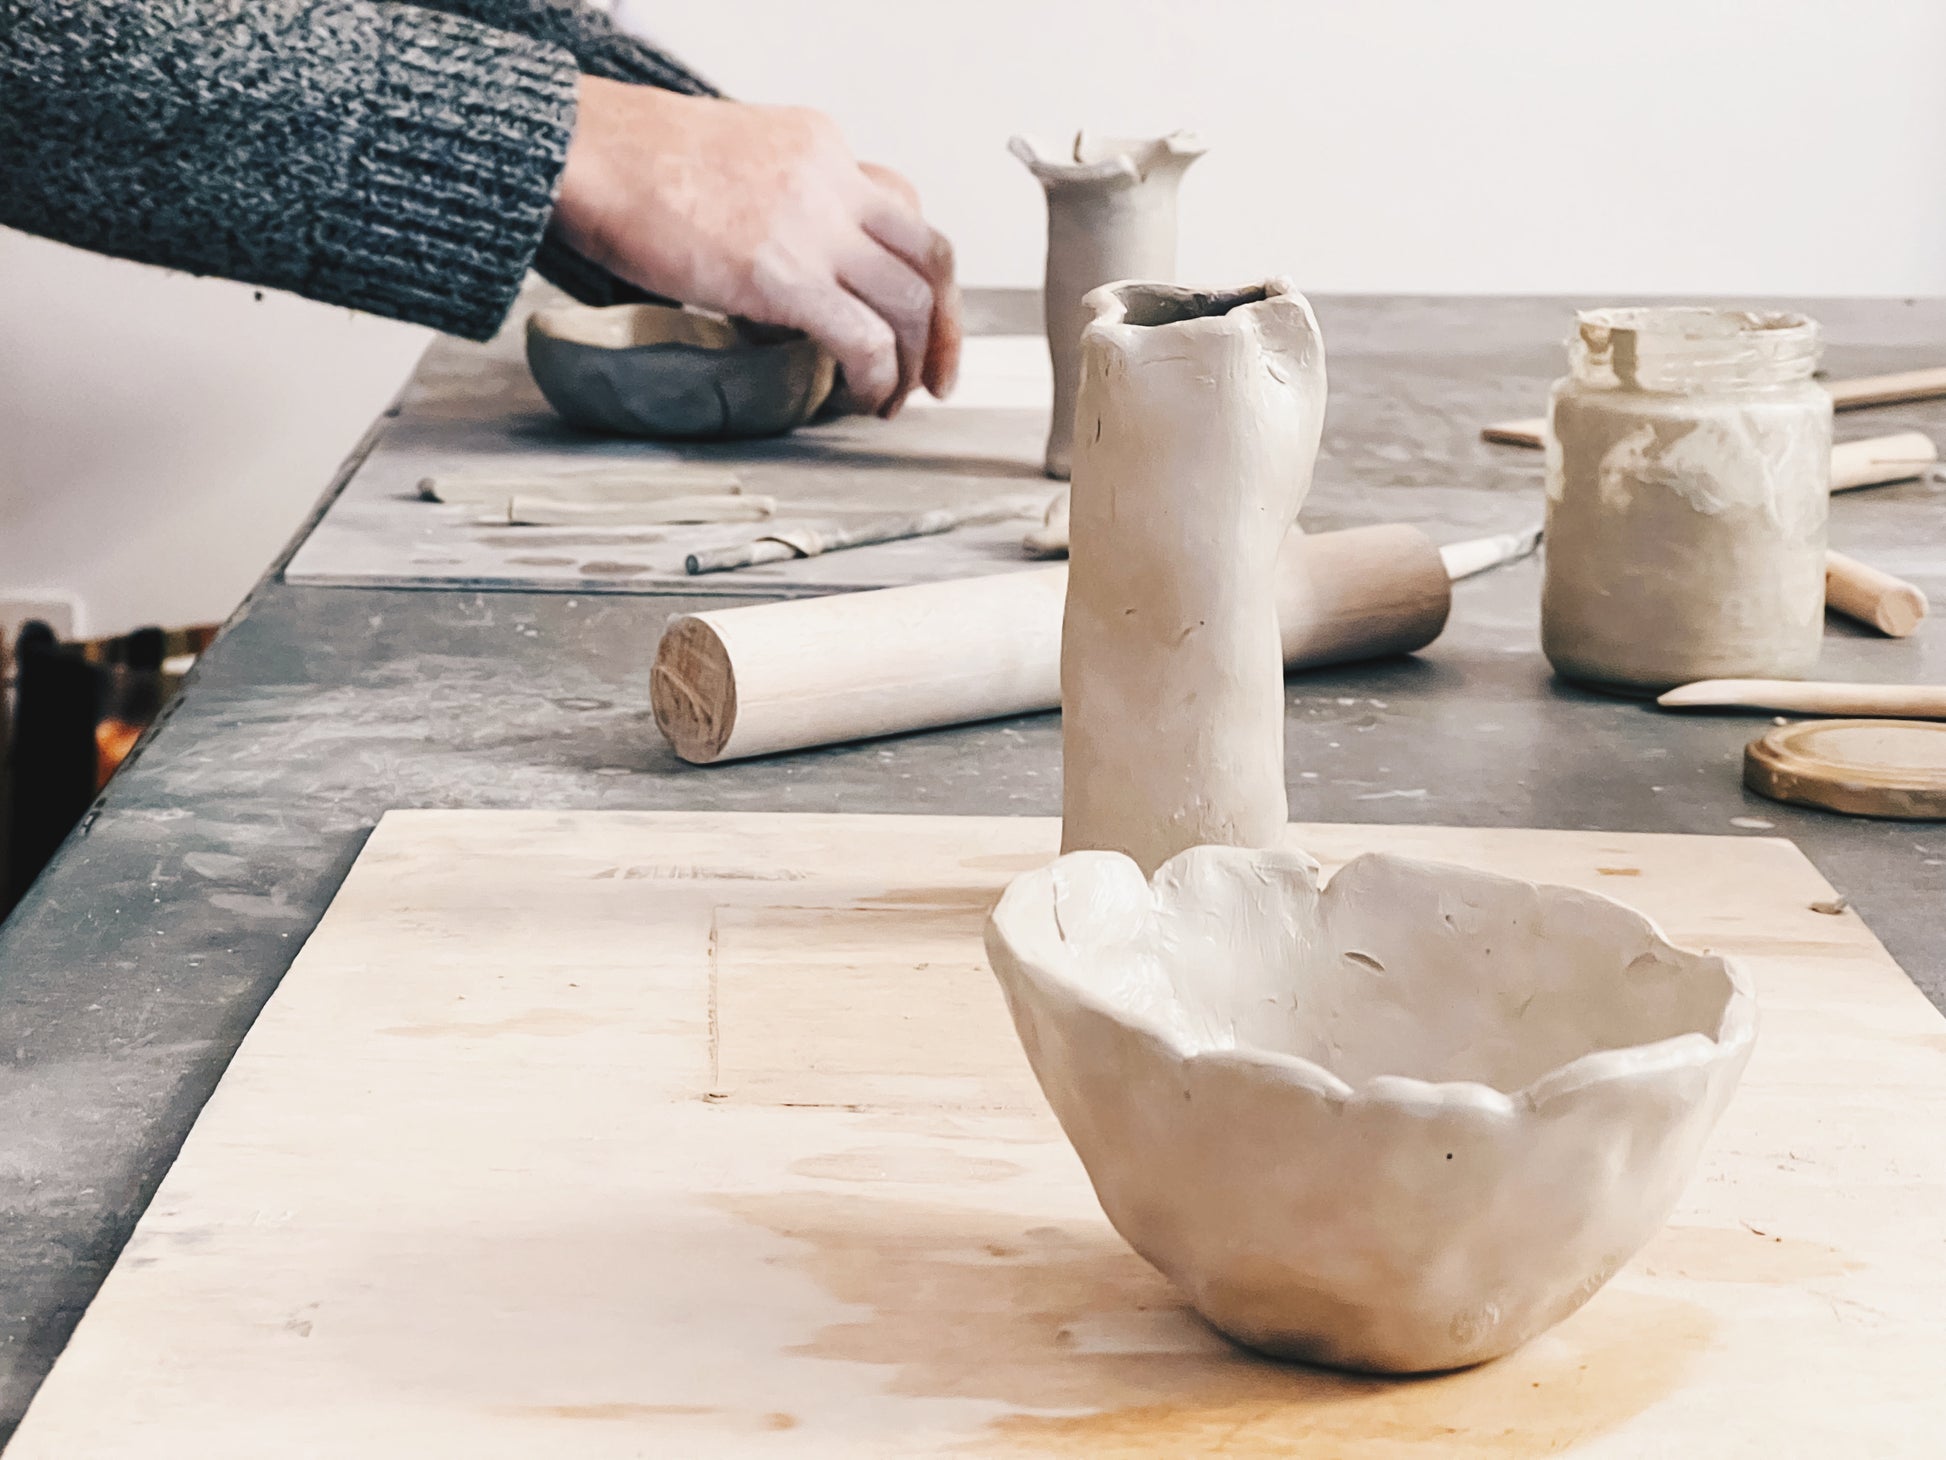 Creative Hand Building Ceramics Workshop with Keegan in Berlin, Germany by subcultours